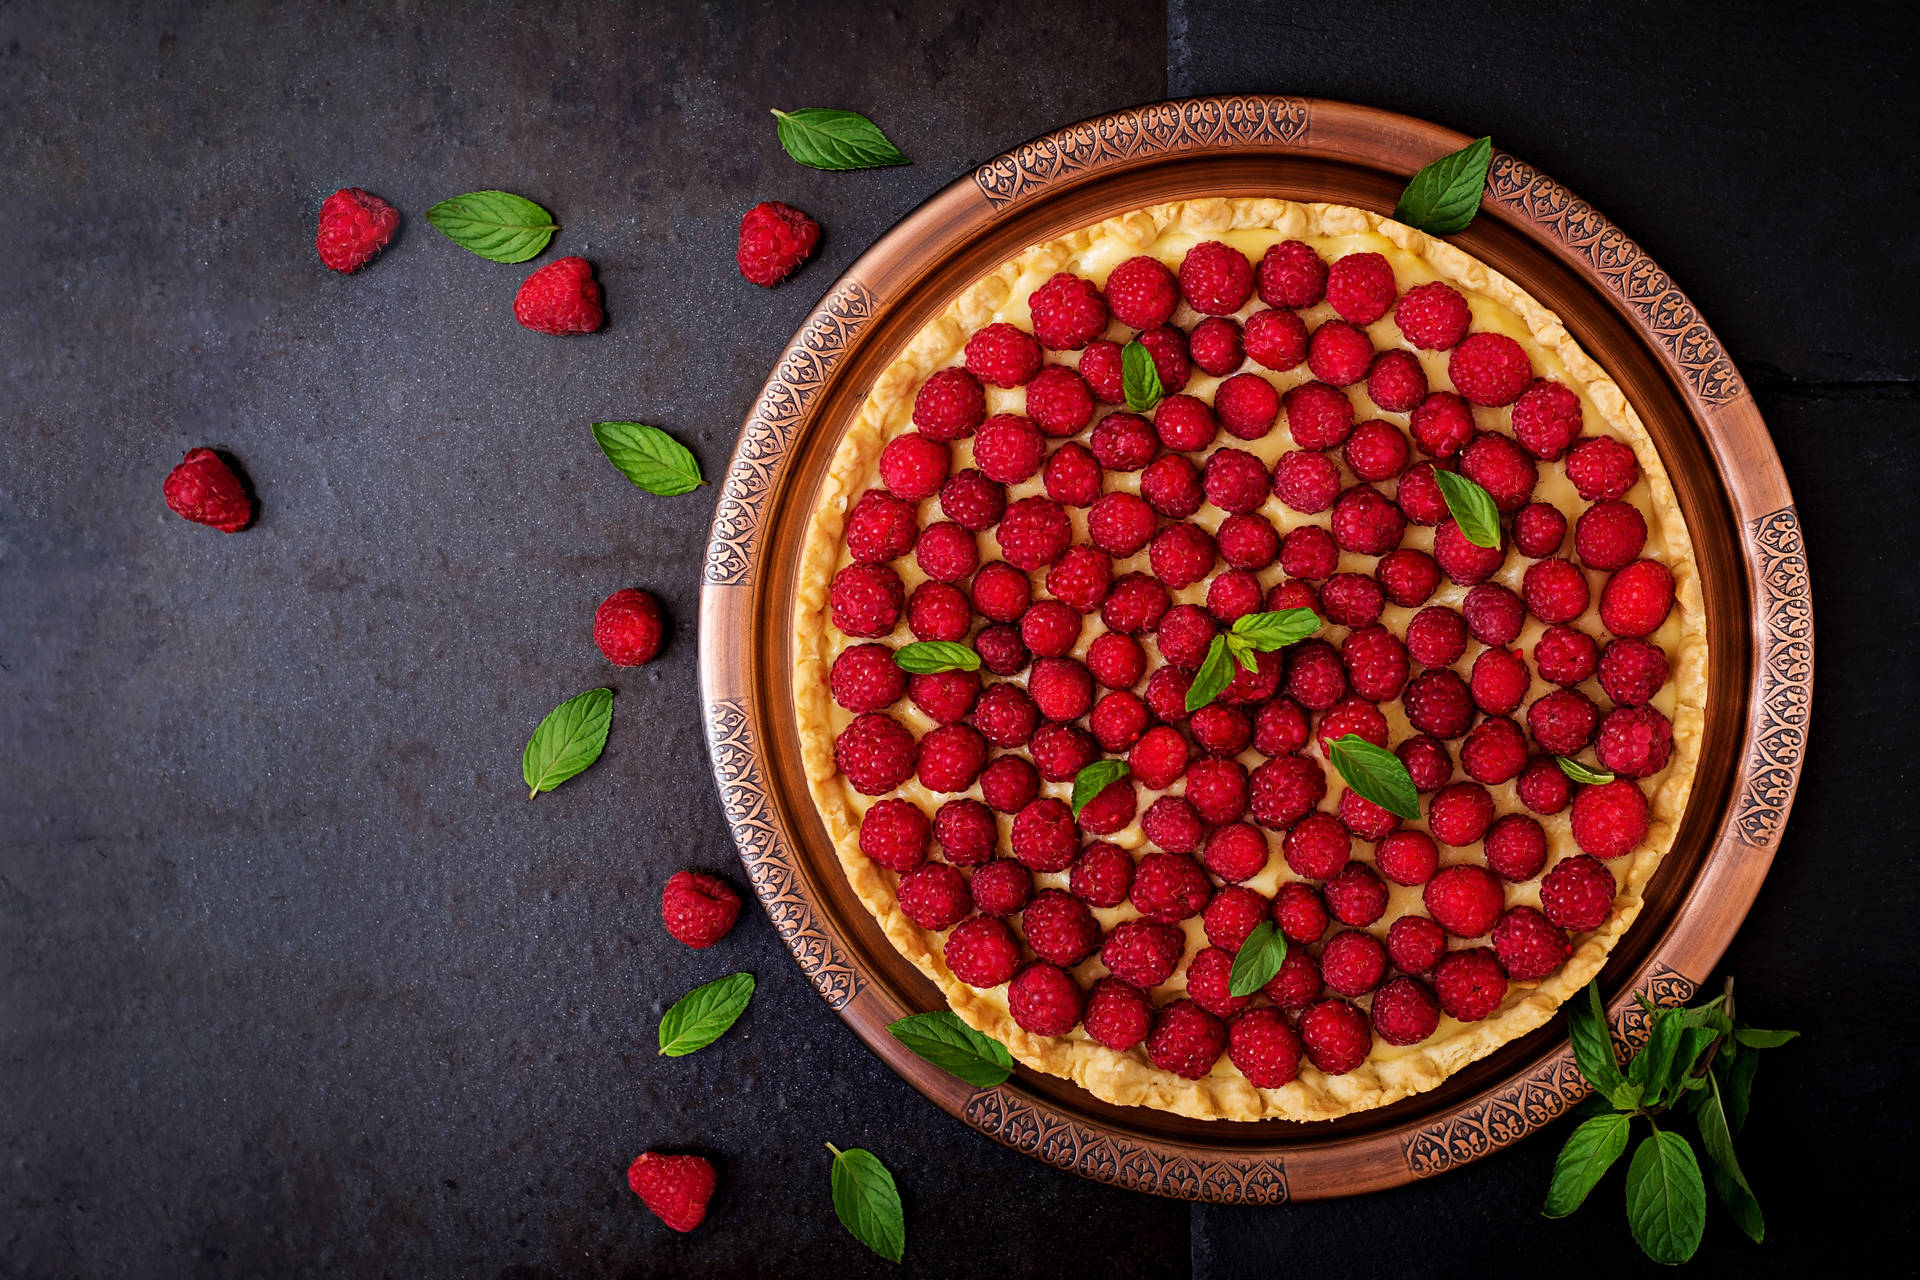 Pie Filled With Berries Background